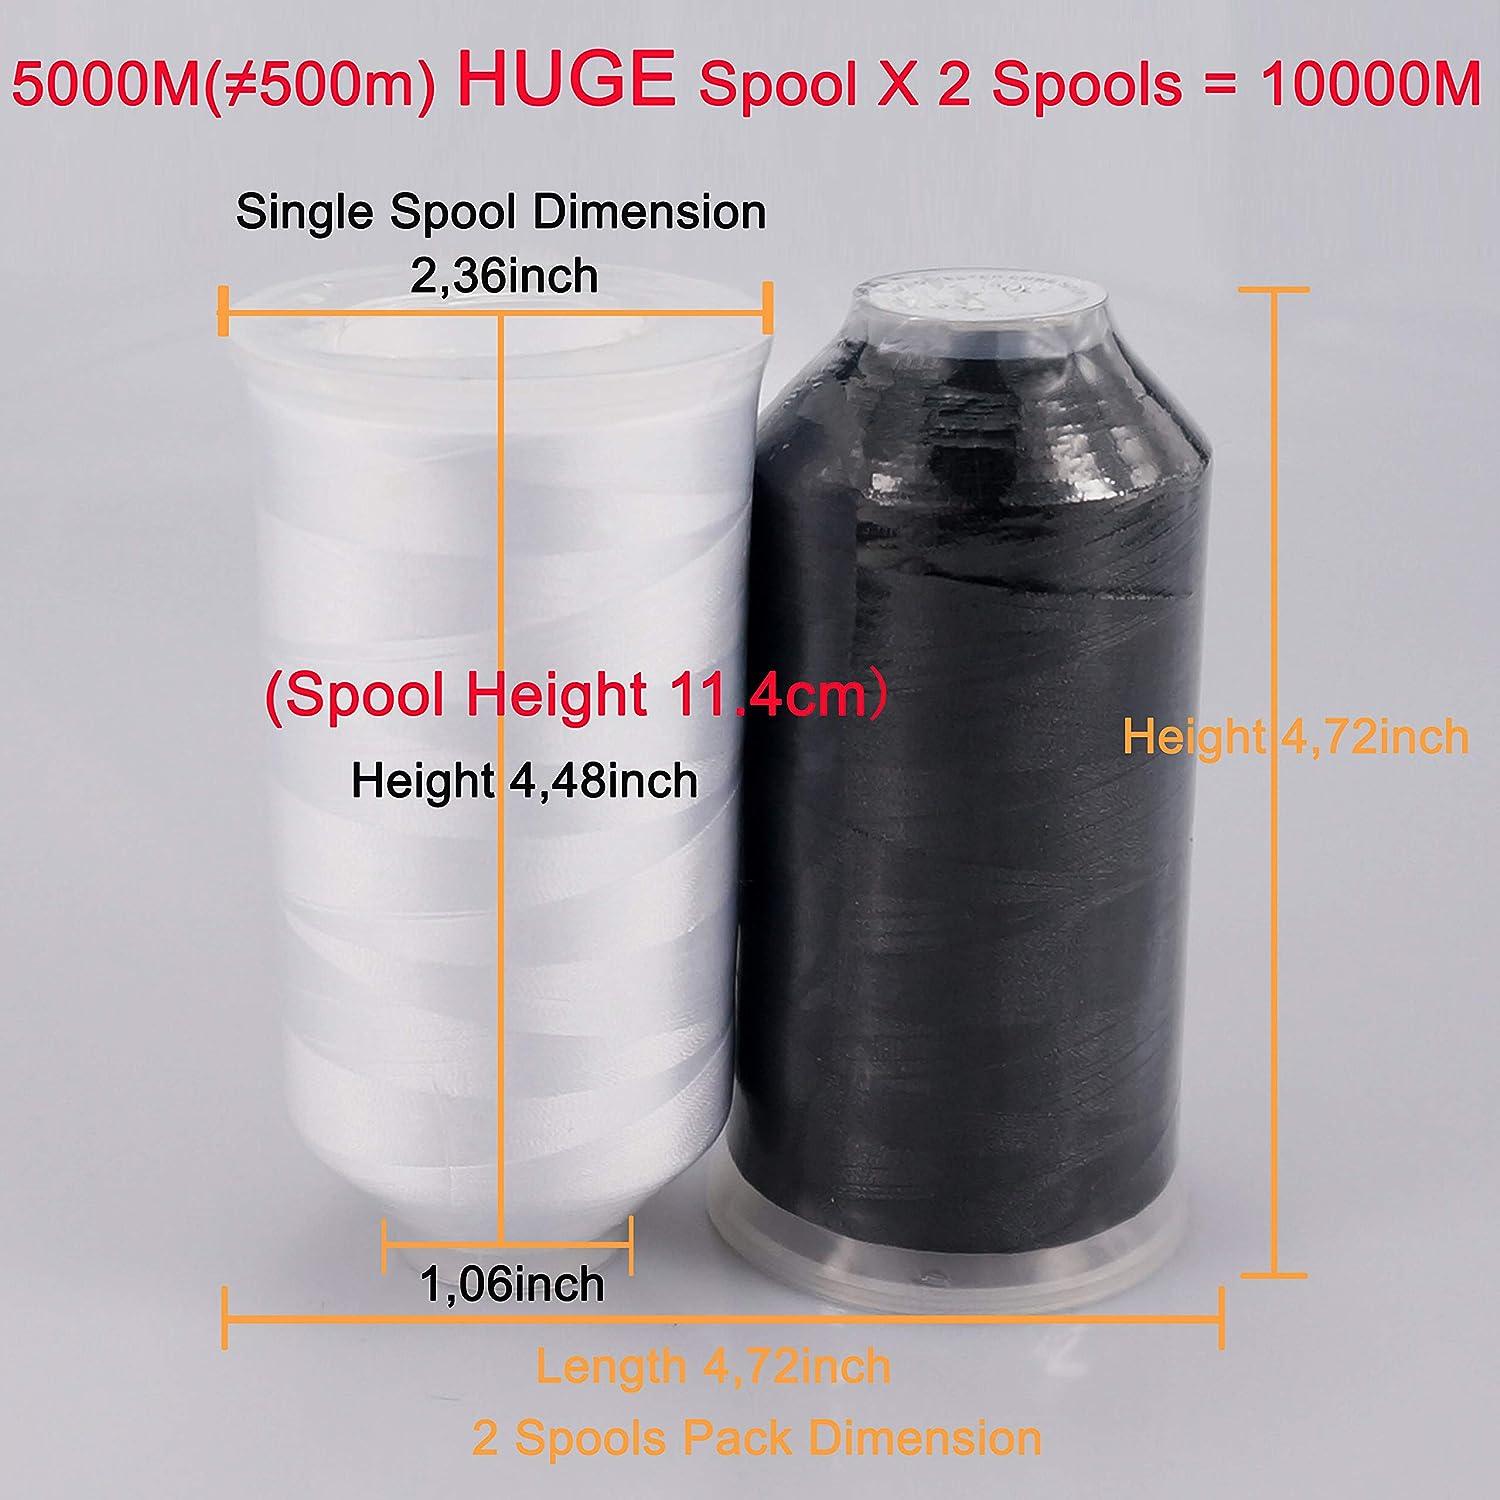 New brothreads - 25 Basic Colors of Huge Spool 5000M Polyester Embroidery  Machine Thread for Commercial and Domestic Embroidery Machines